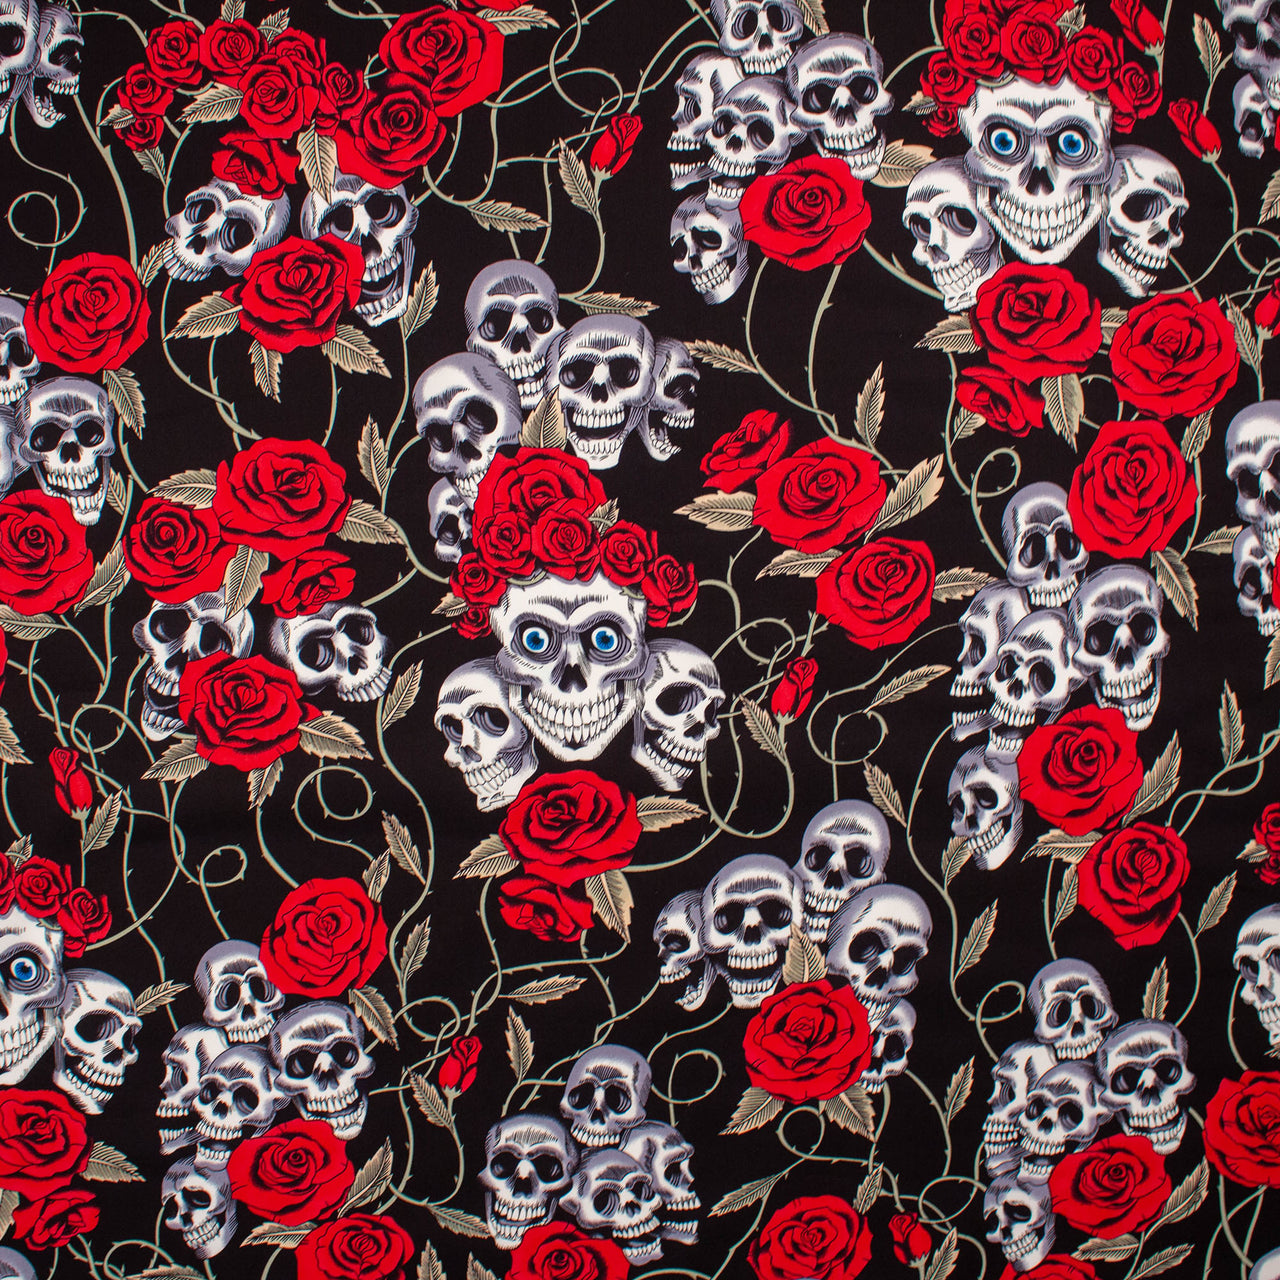 Bonehead Skulls with Red Roses & Blue Eyes Cotton fabric - Rose & Hubble Design